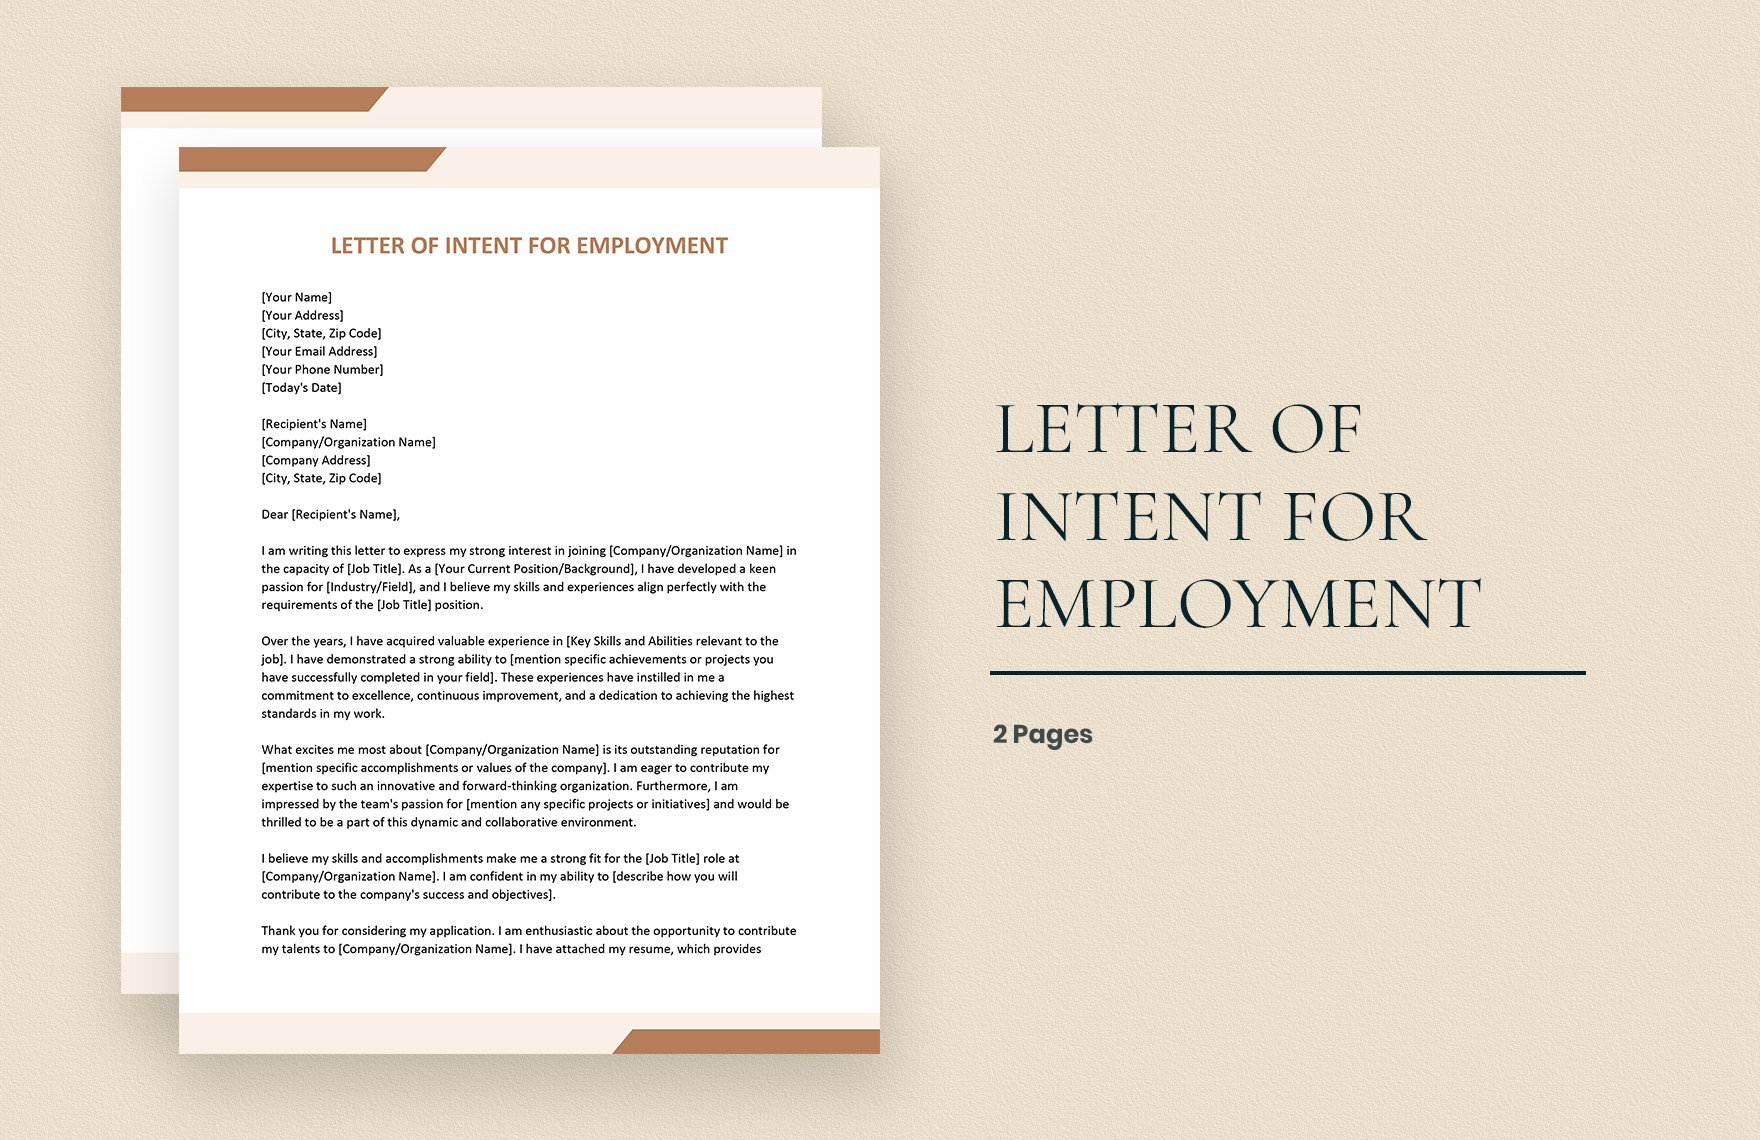 Free Letter of Intent for Employment